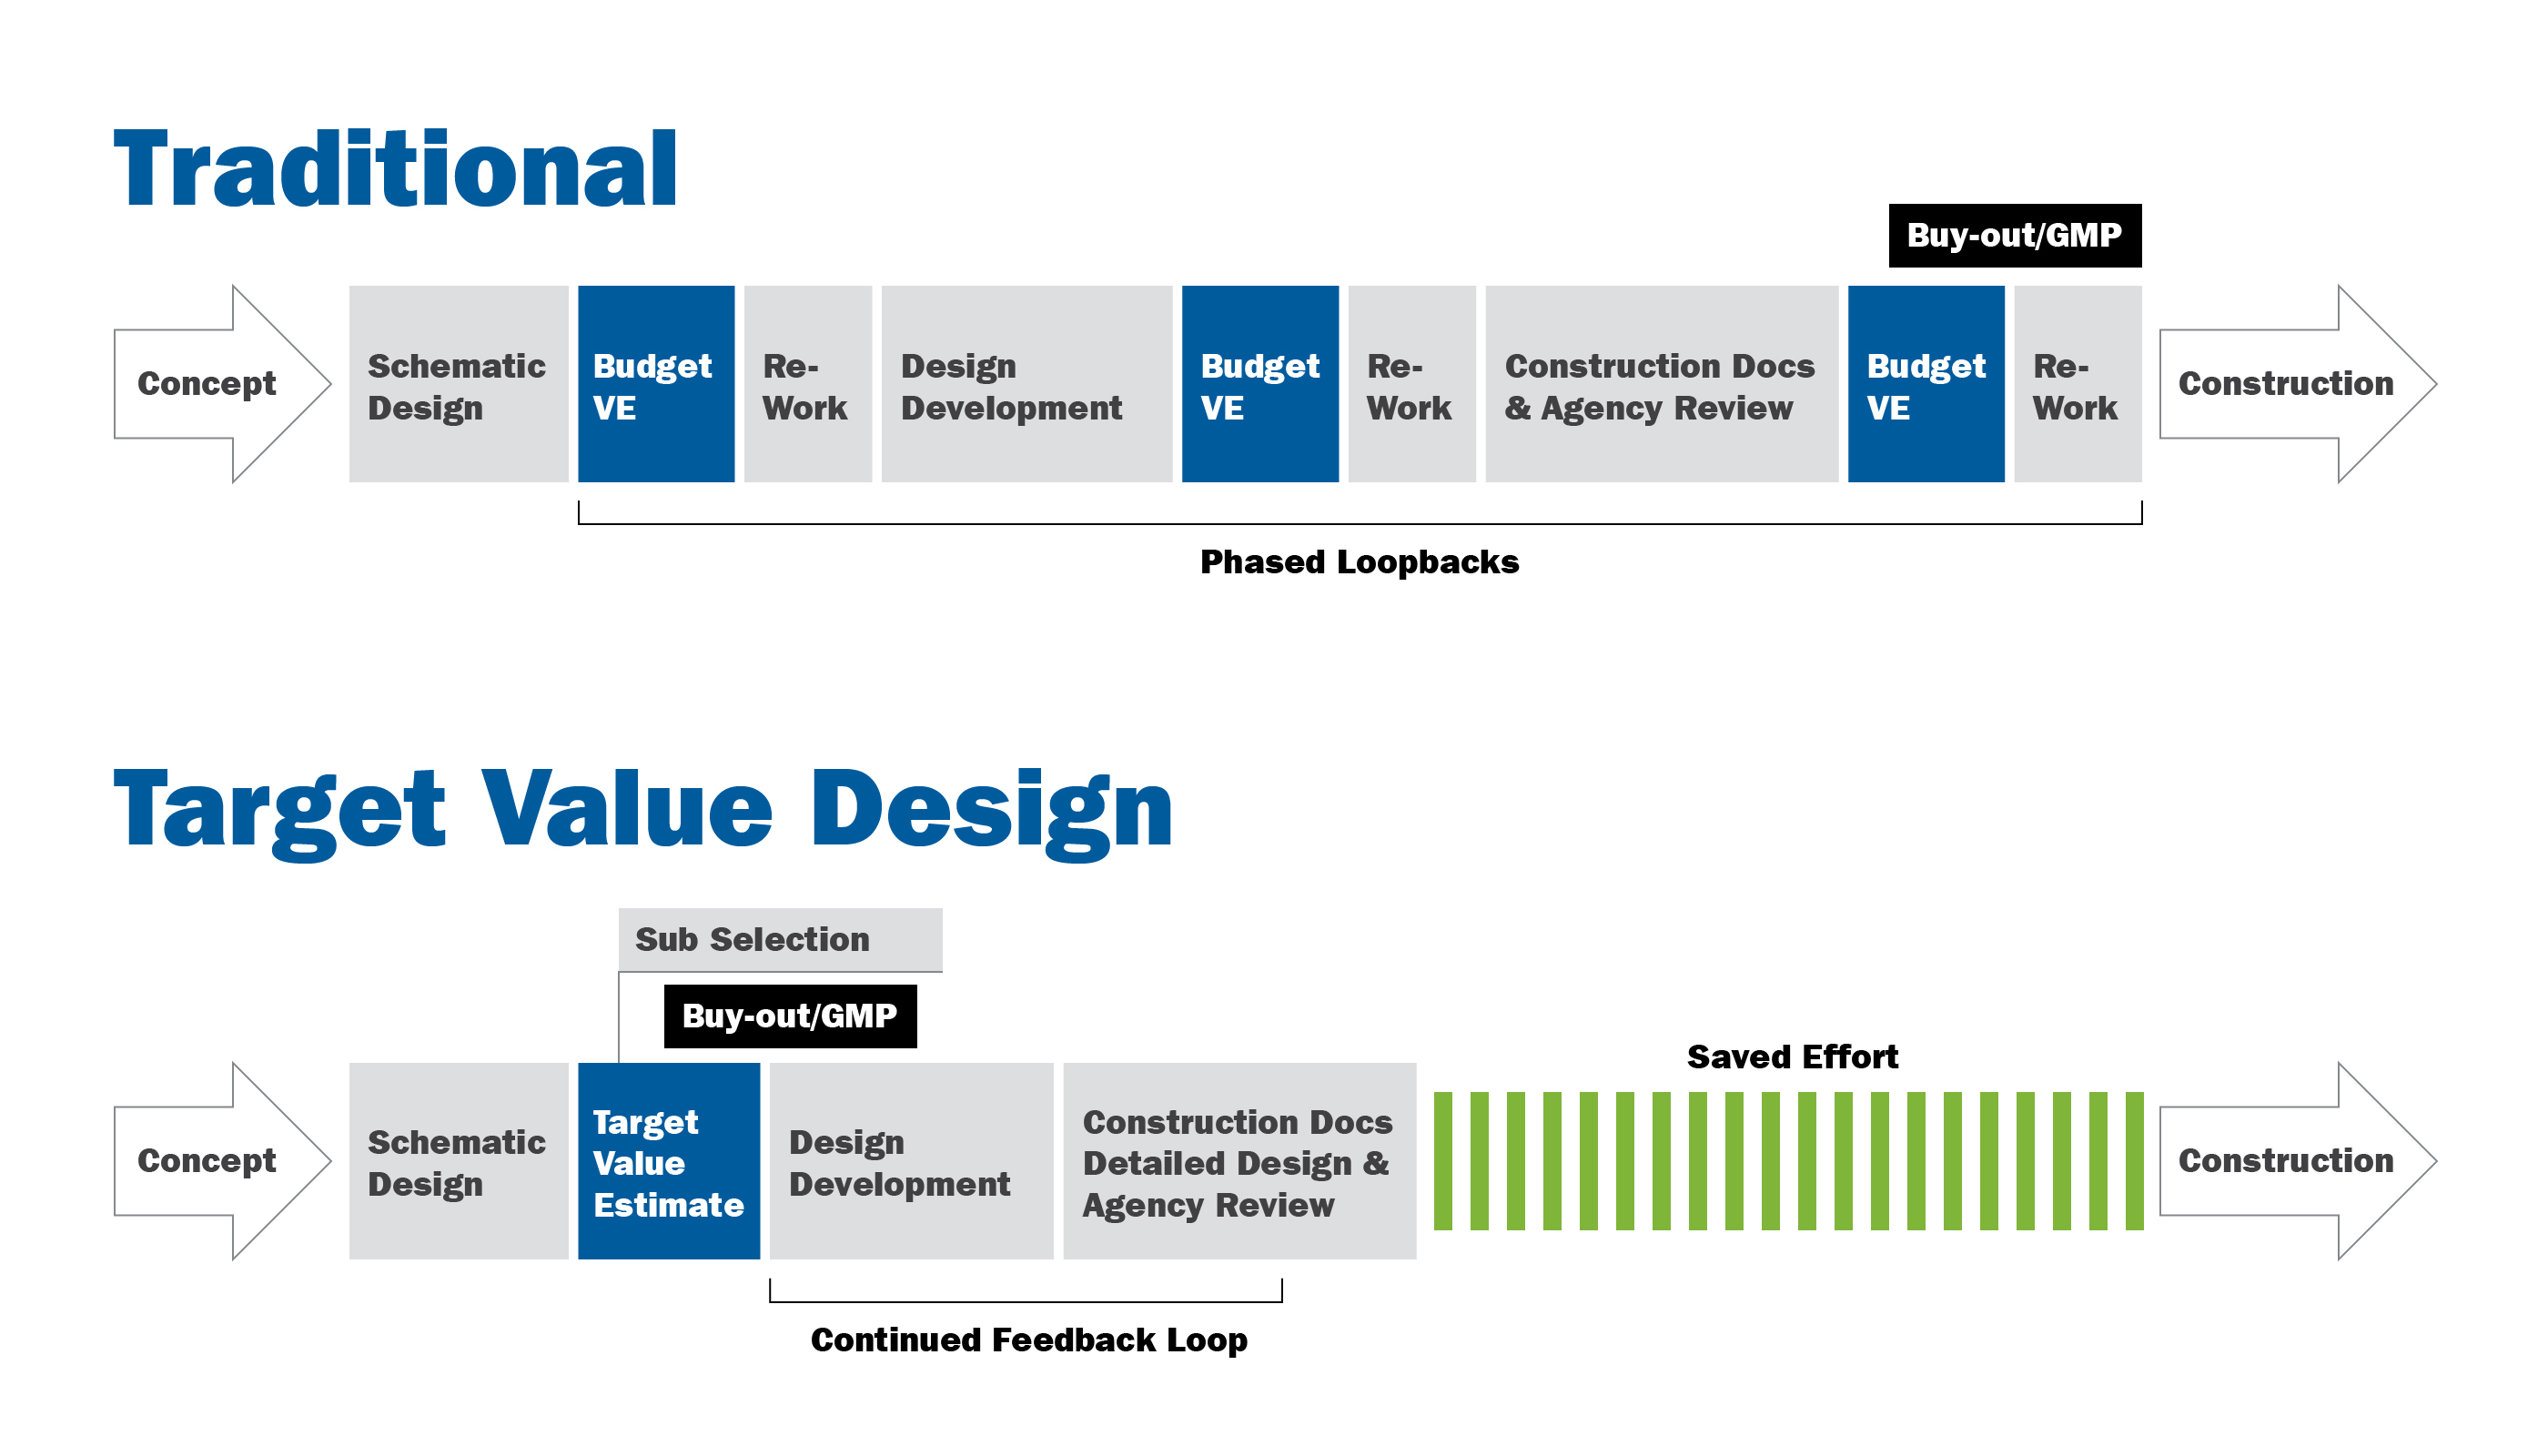 Long loop traditional phases vs concurrent phases in target value approach which improves schedule and value.